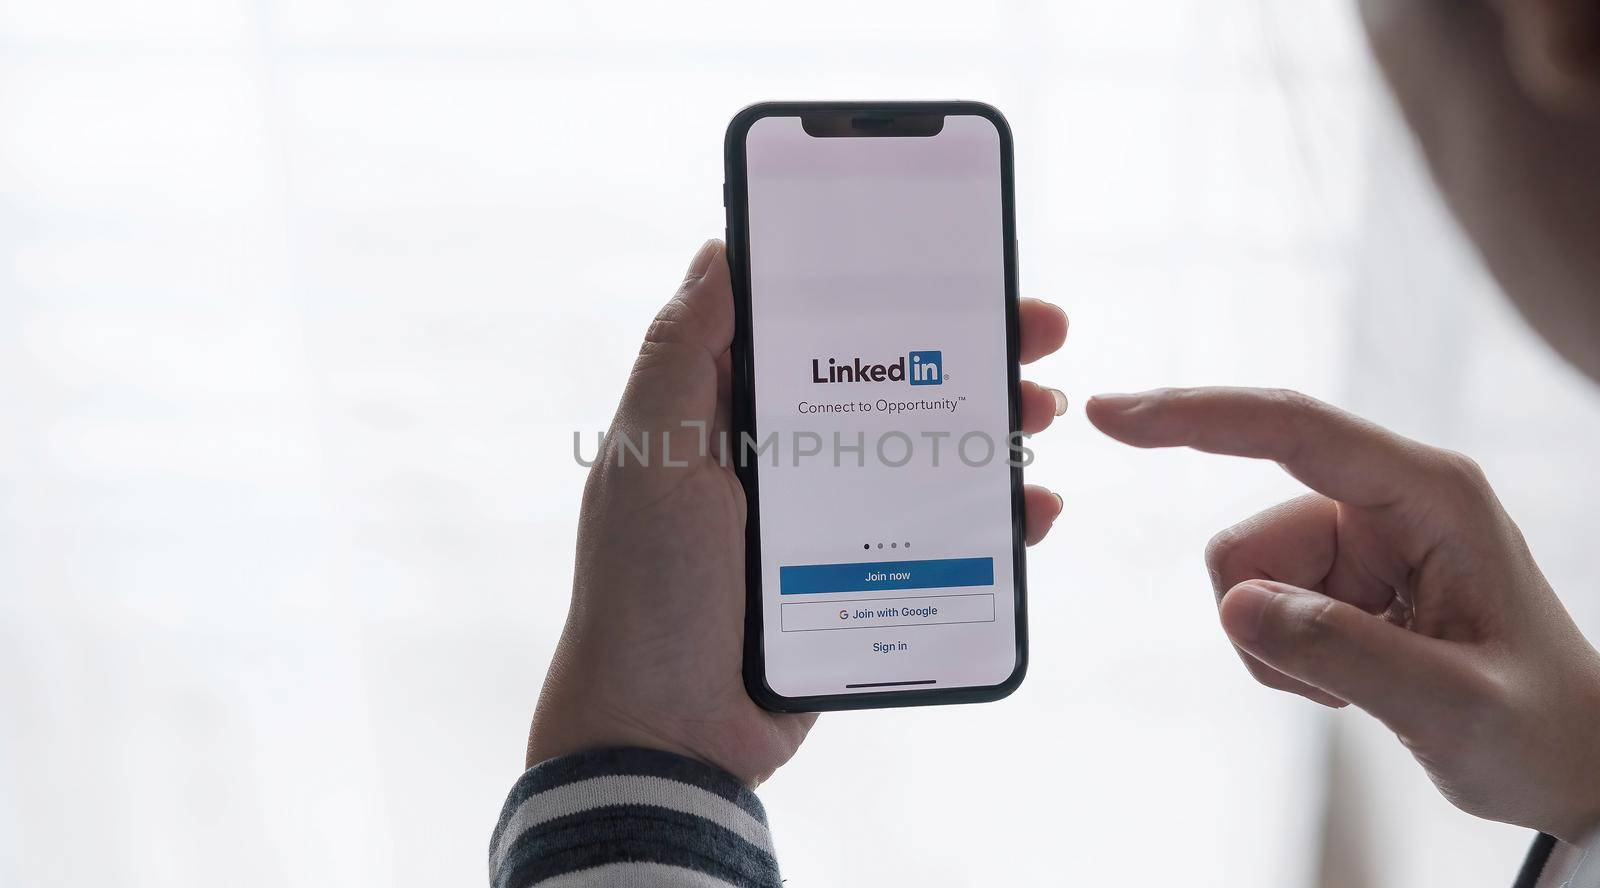 CHIANG MAI, THAILAND, JUL C12, 2021 : A women holds Apple iPhone Xs with LinkedIn application on the screen.LinkedIn is a photo-sharing app for smartphones..